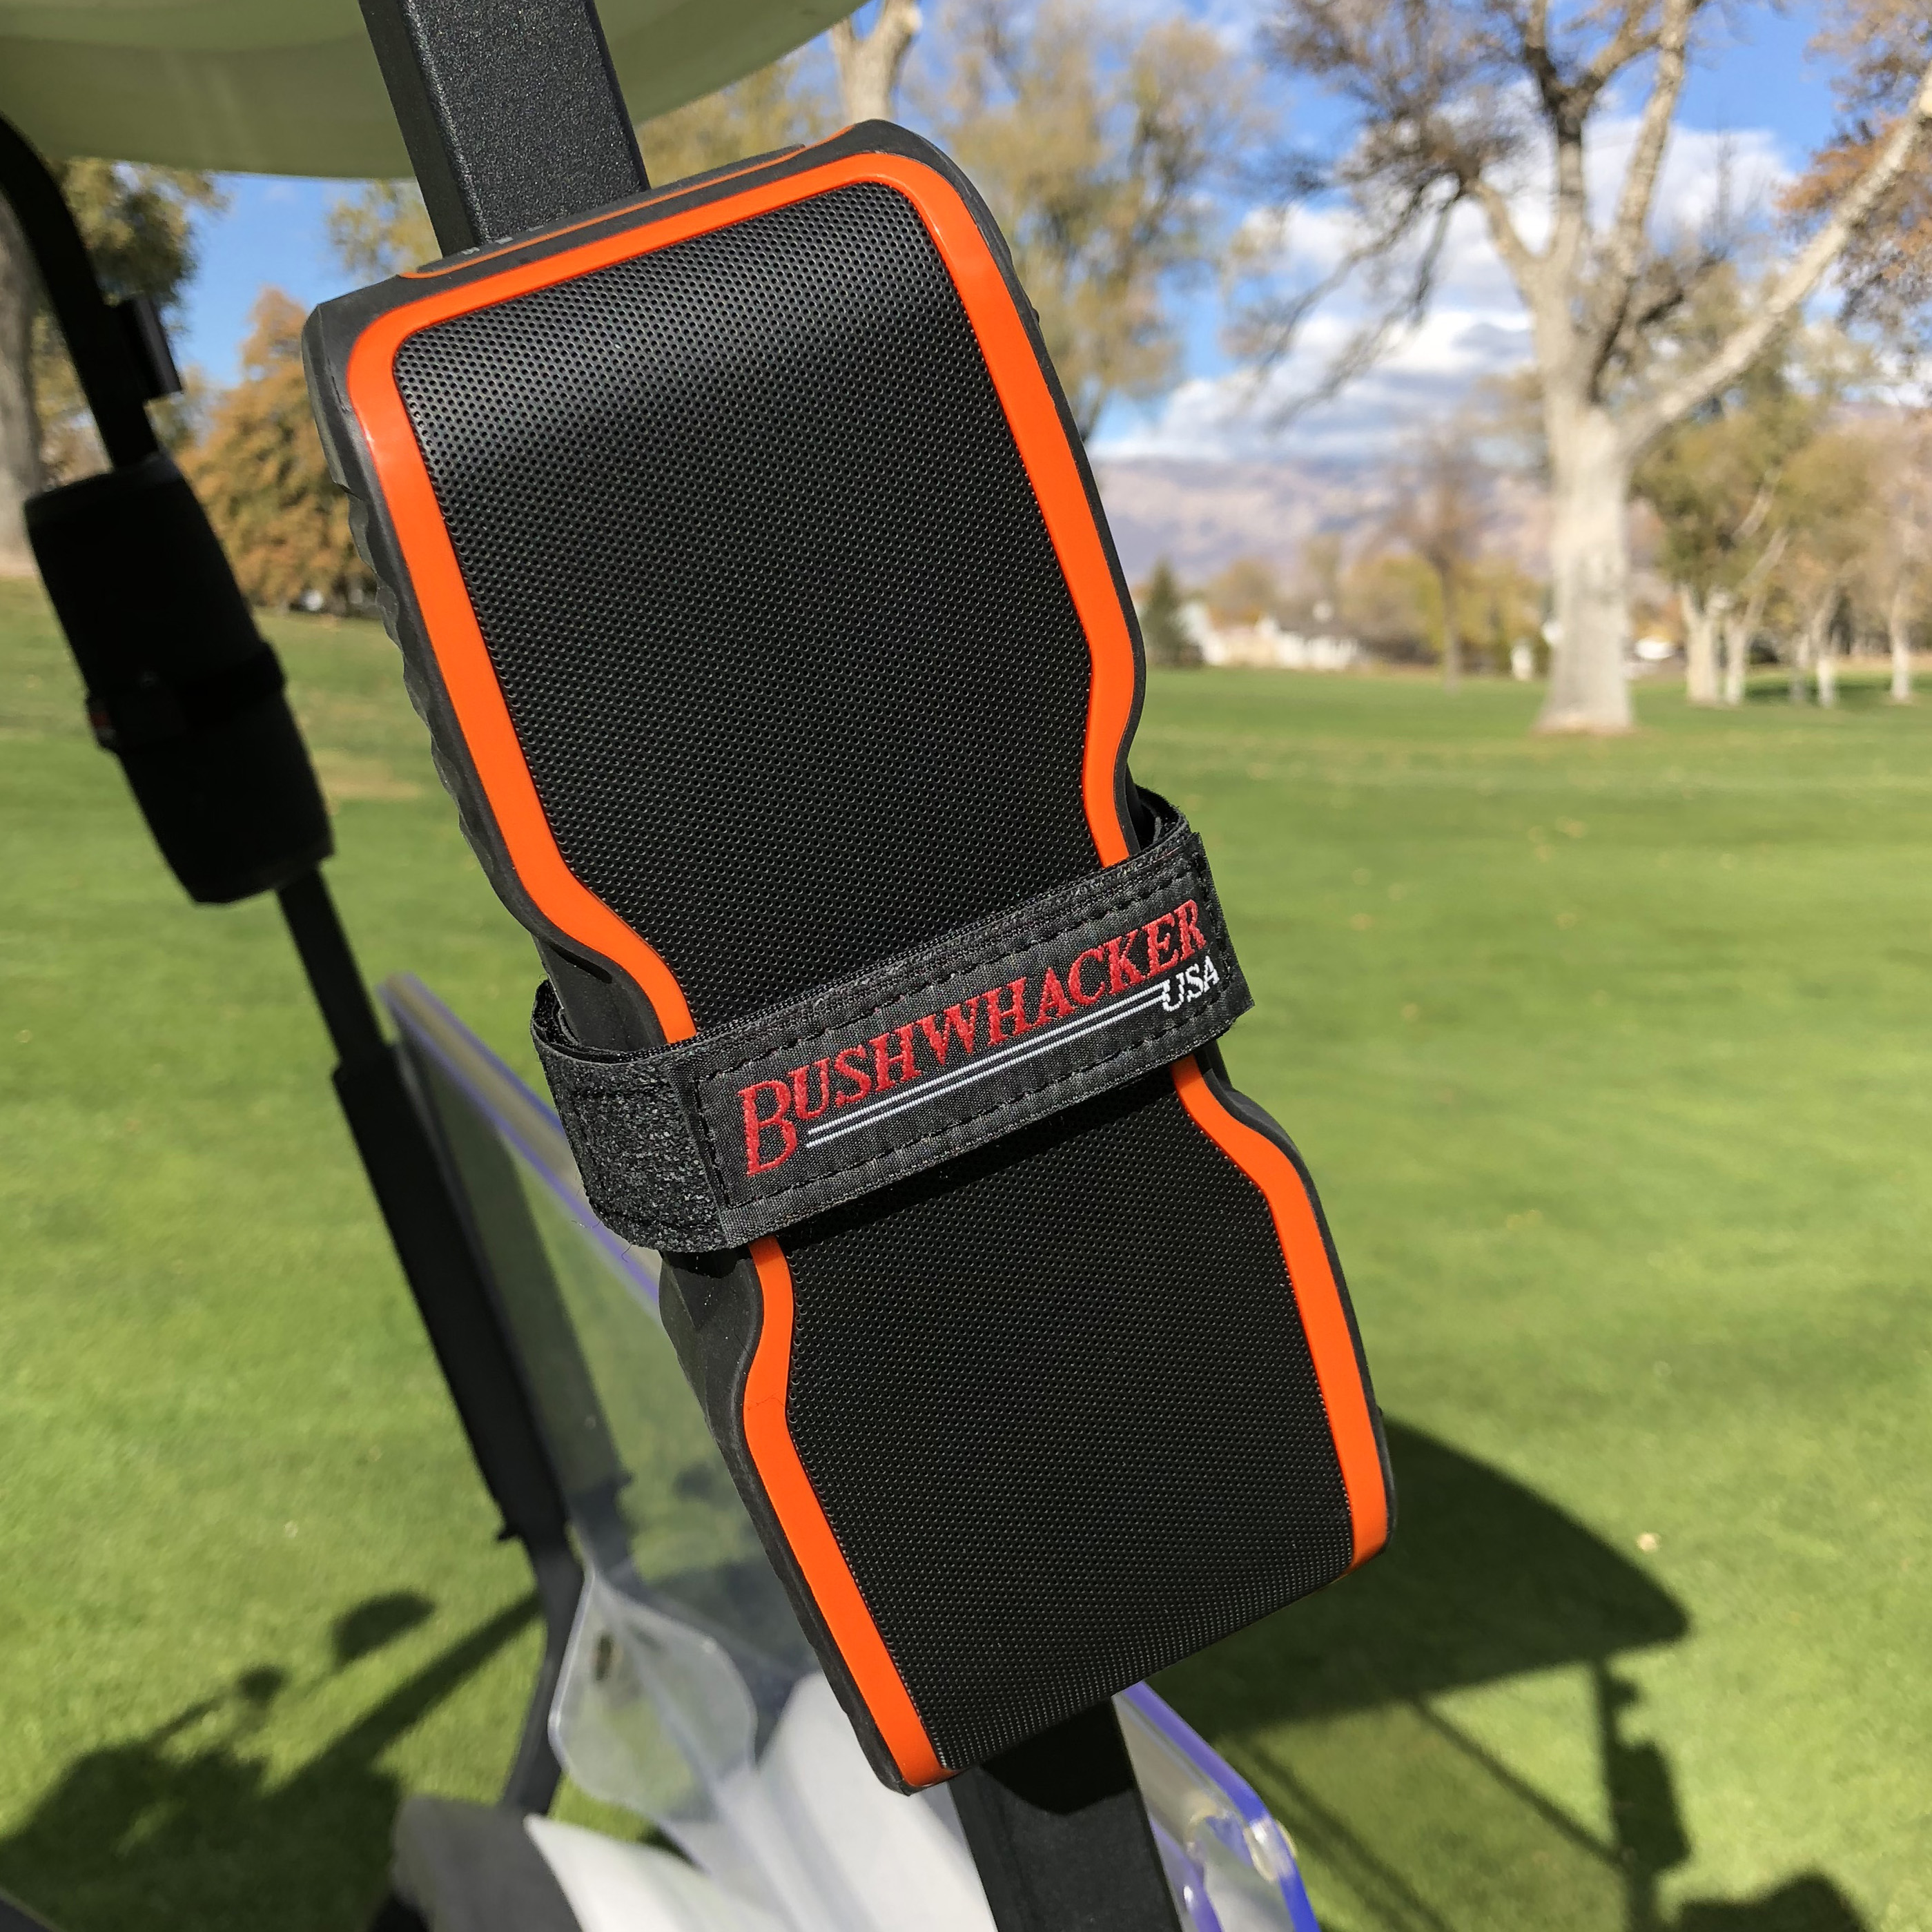 Bushwhacker The Original Portable Speaker Mount for Golf Cart Railing - Adjustable Strap Fits Most Bluetooth Wireless Speakers Attachment Accessory Holder Bar Rail - image 5 of 6